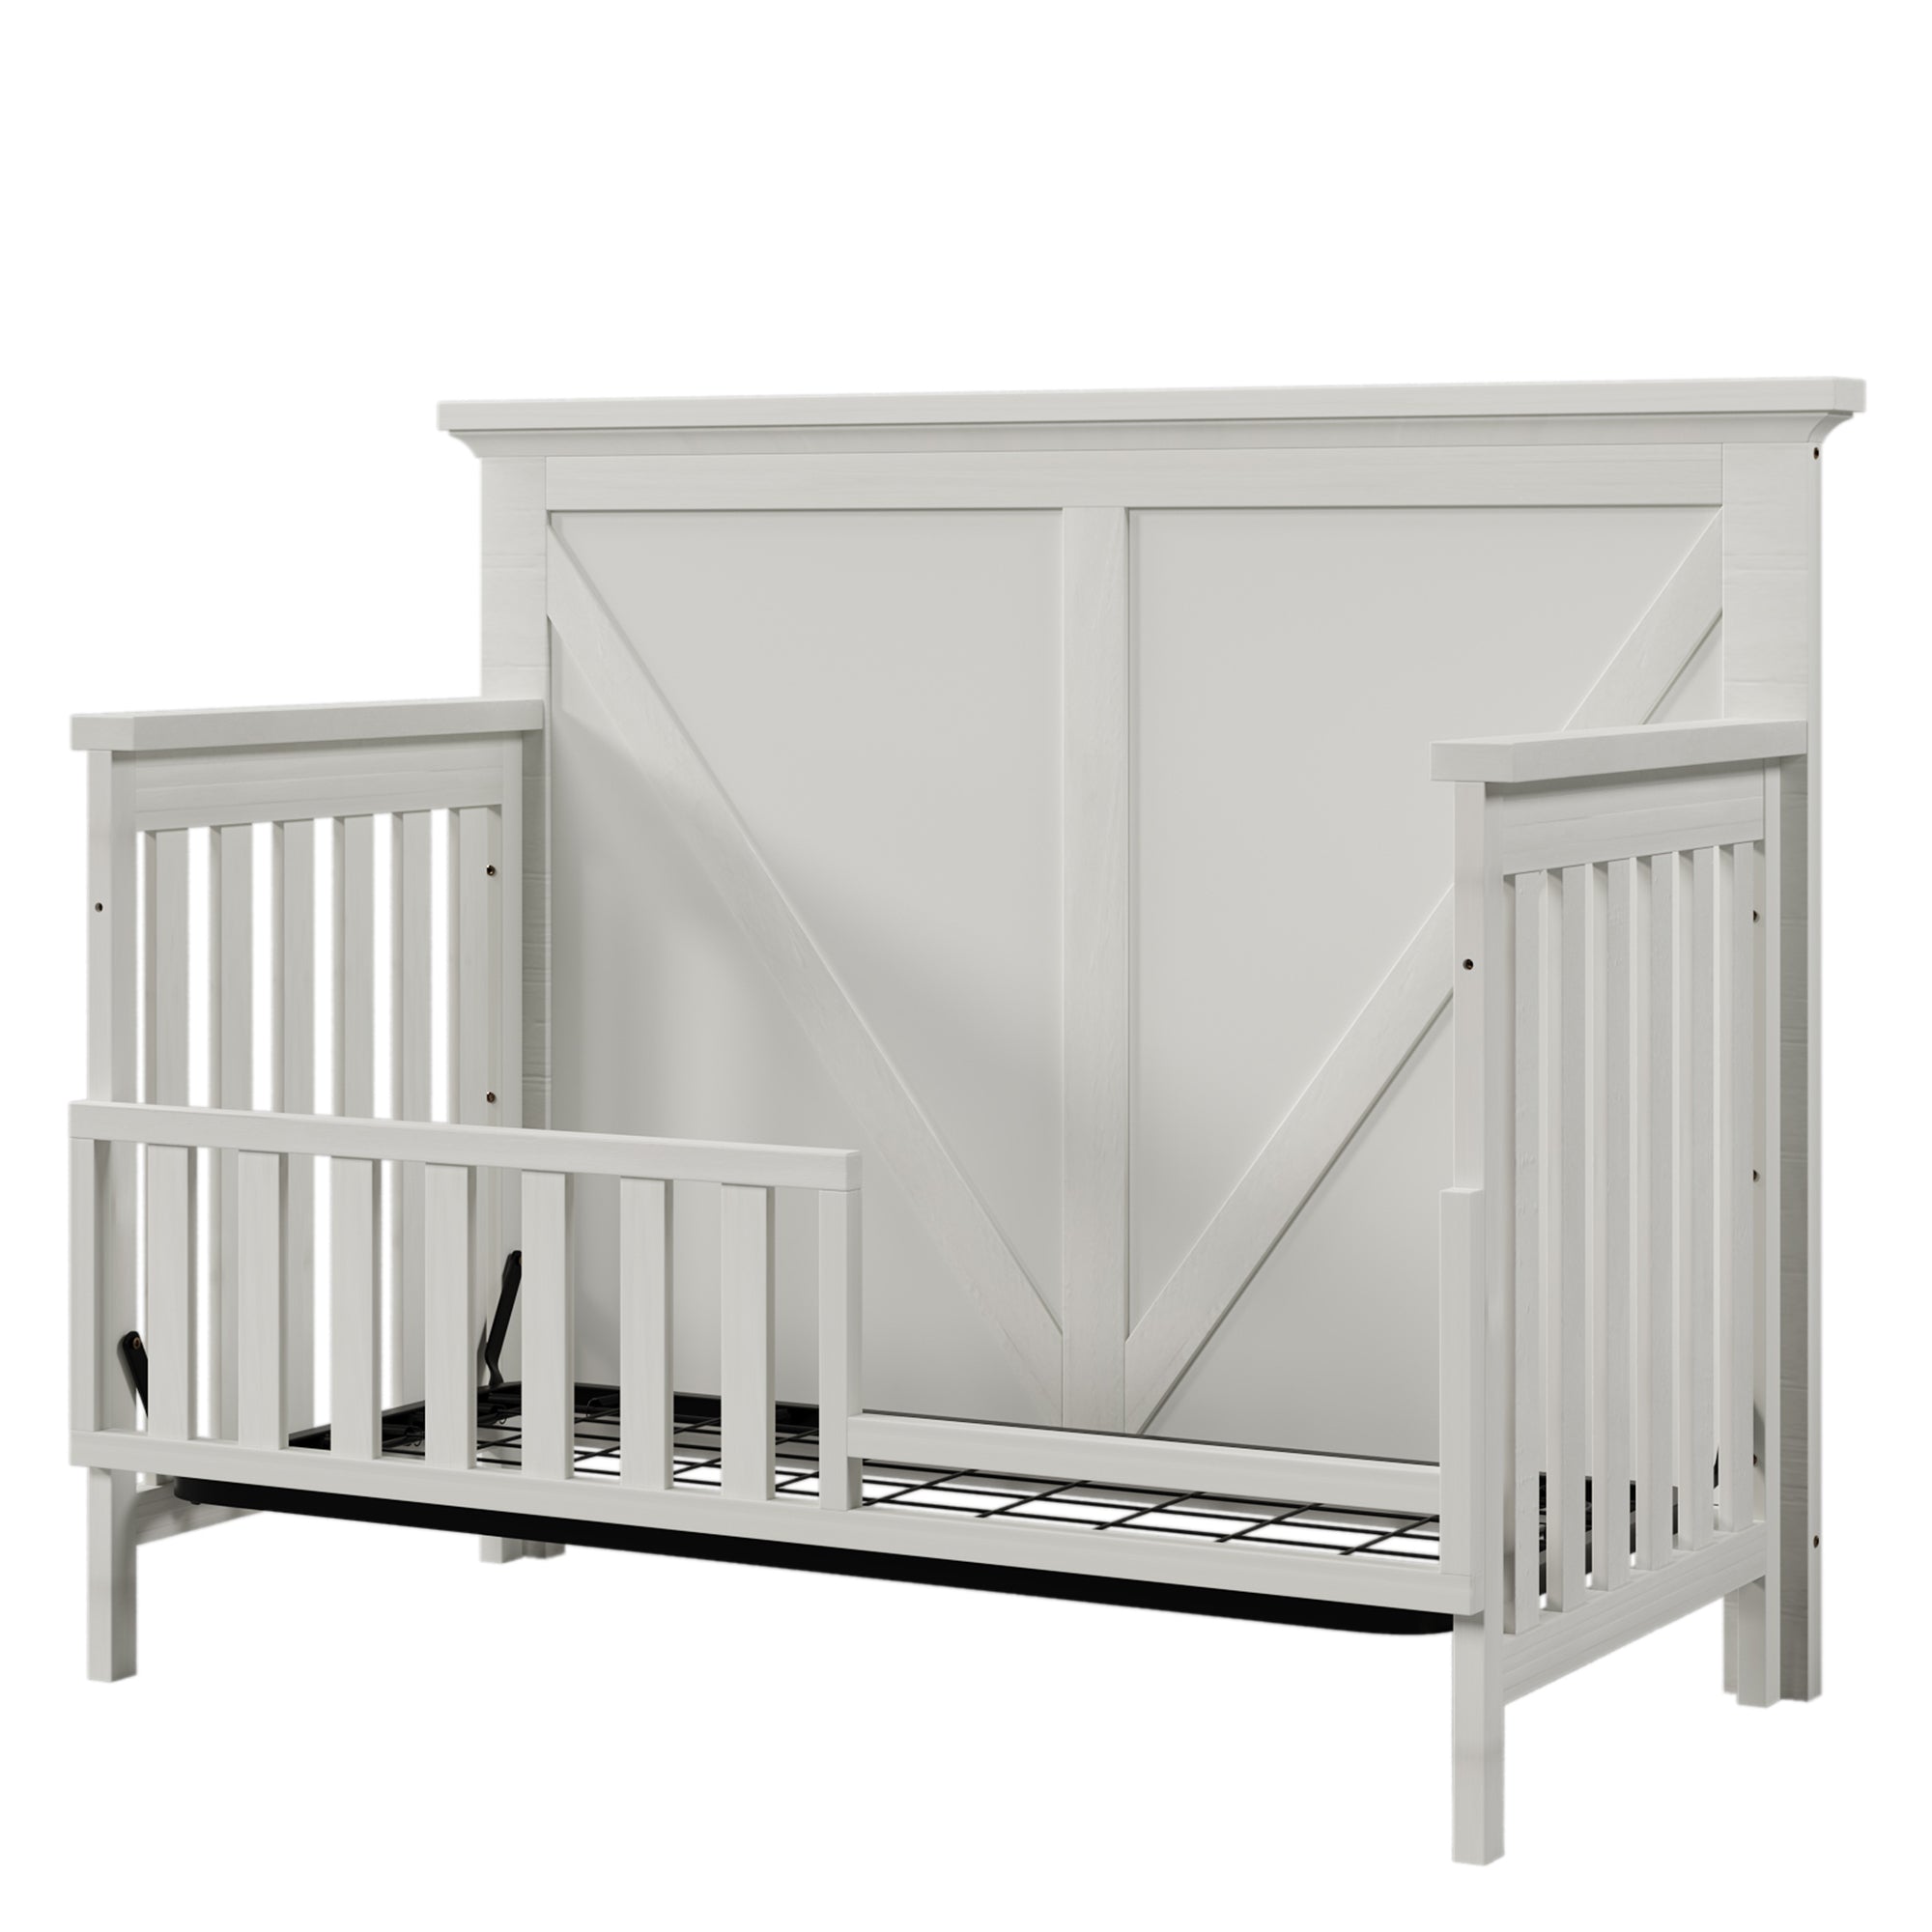 Rustic Farmhouse Style Whitewash Toddler Bed Safety white-solid wood+mdf